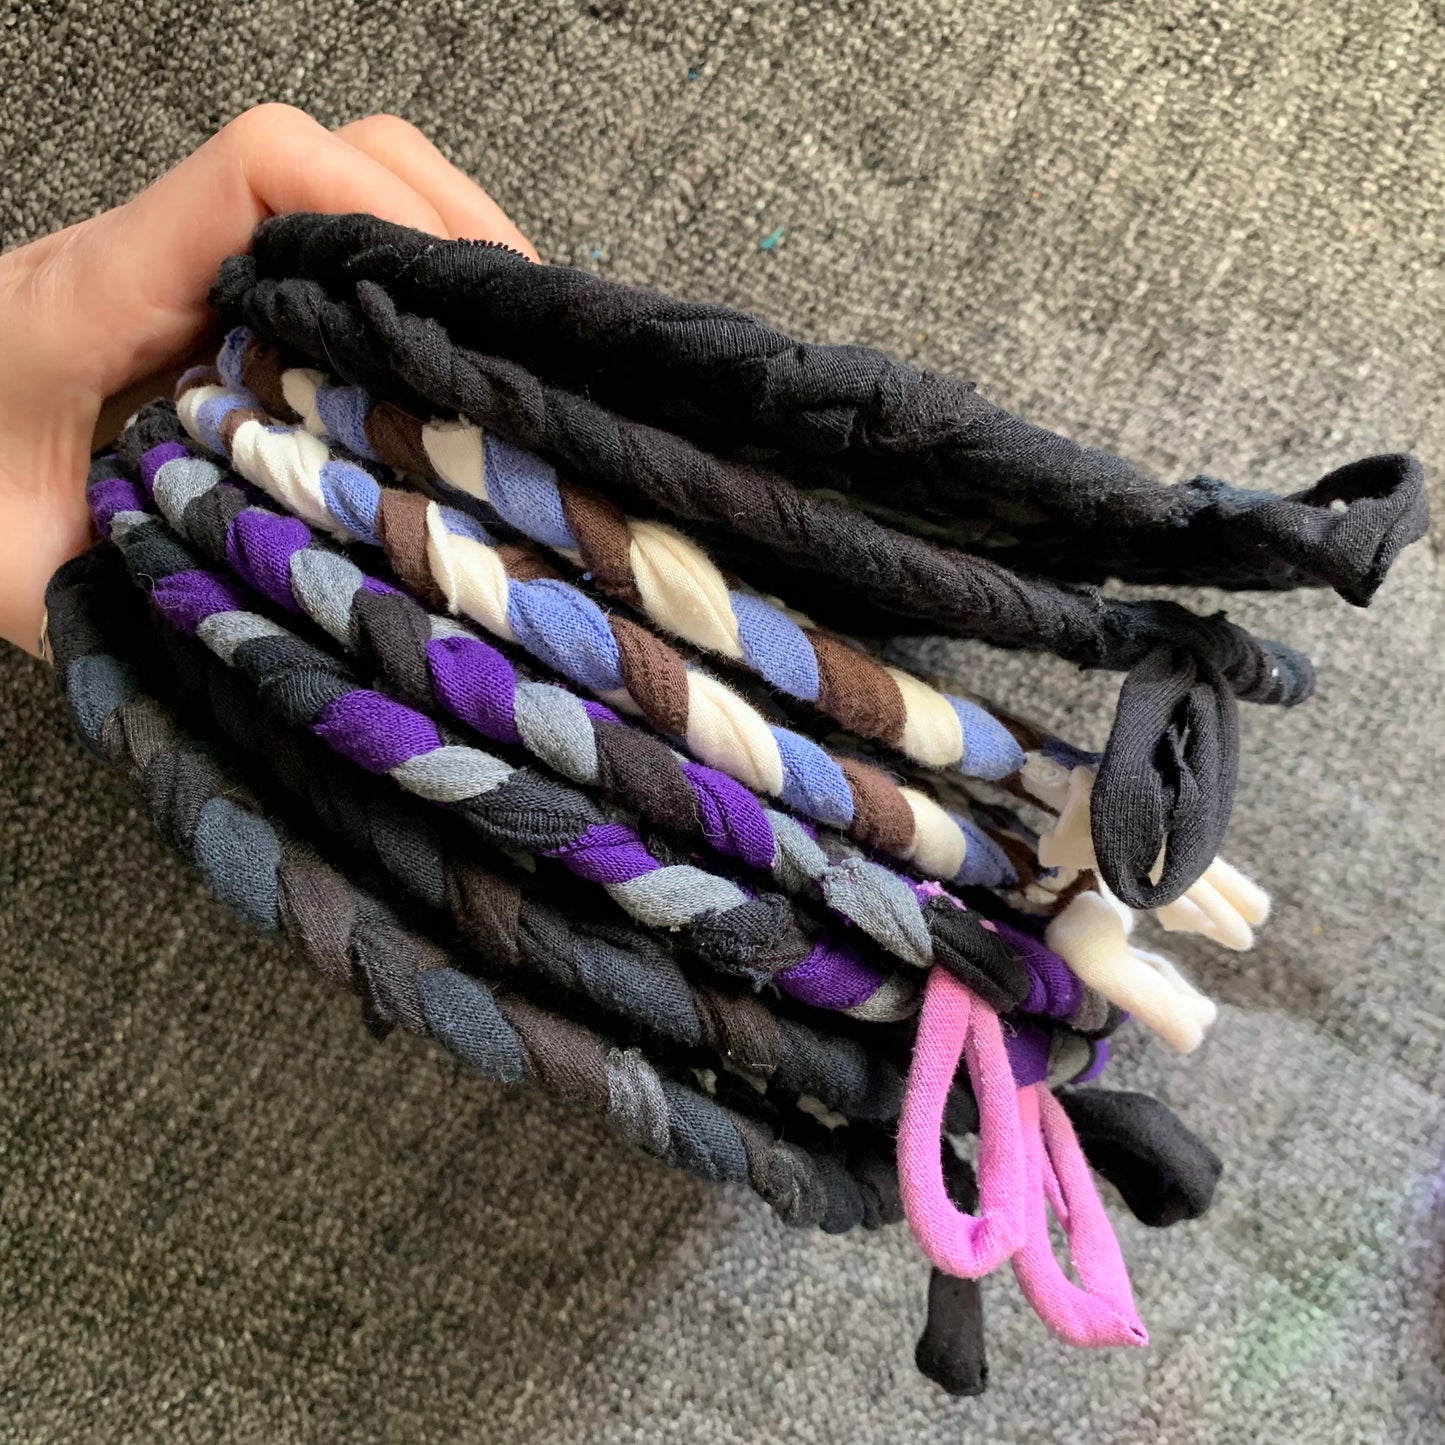 Group of blue purple and black trivet potholders, held by a hand, side view.